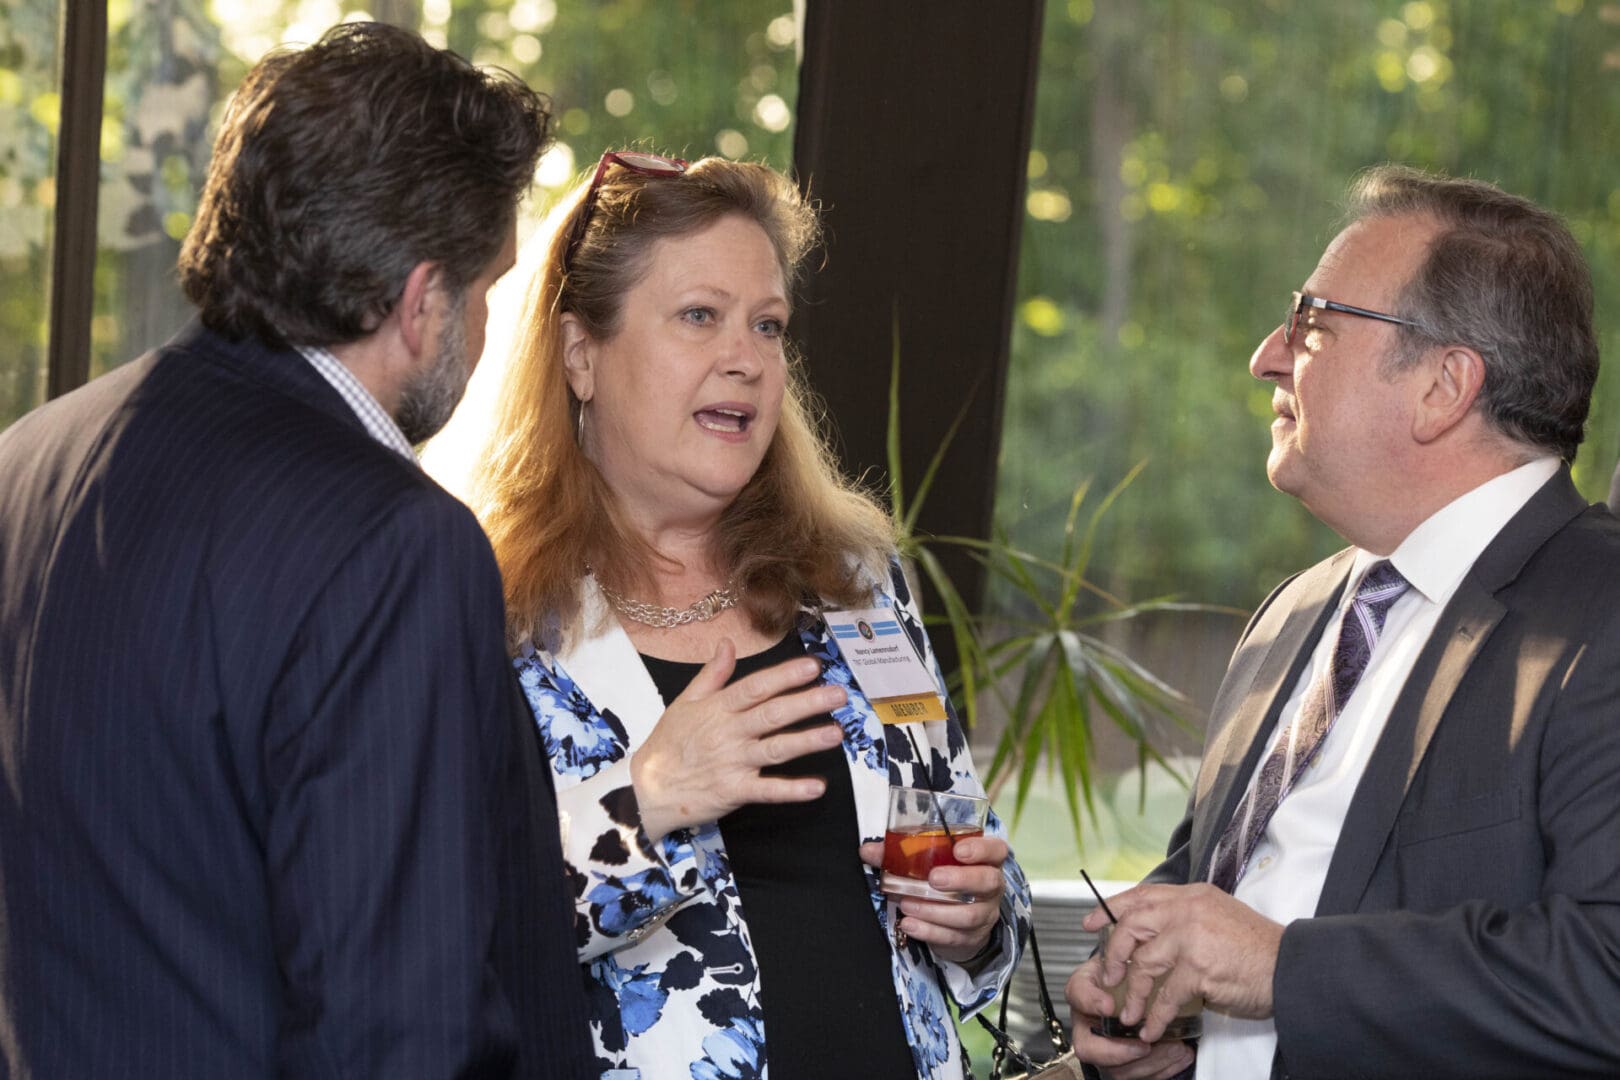 Three business people talking at an event.